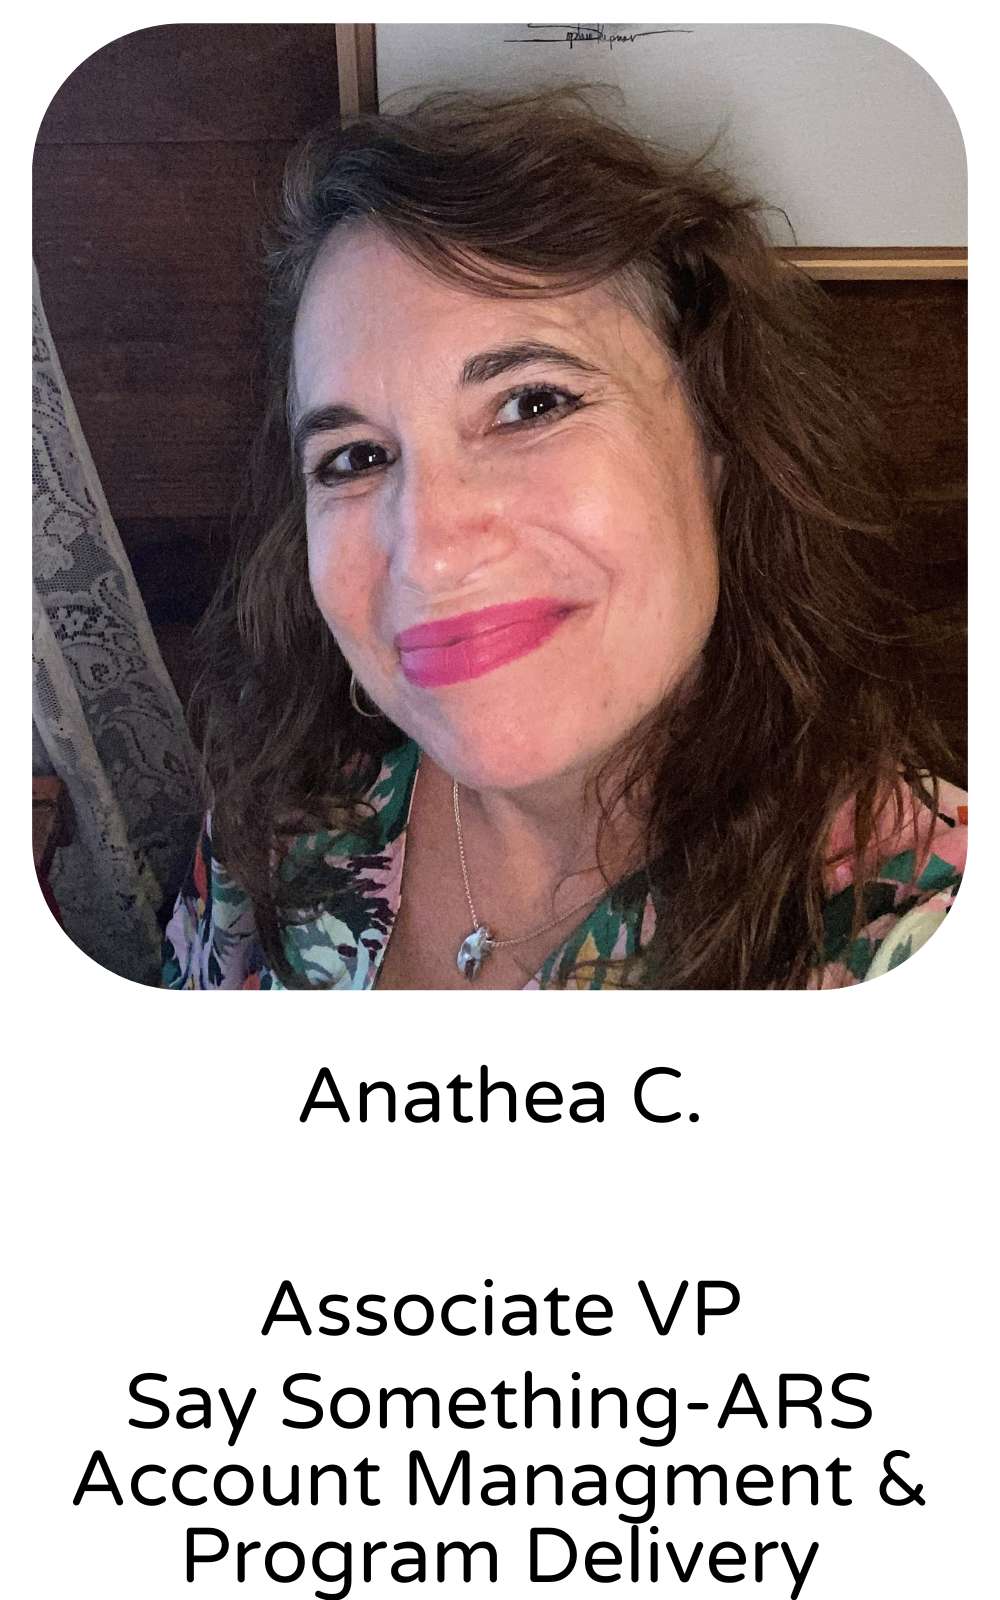 Anathea C., Associate VP, Say Something-ARS Account Management & Program Delivery